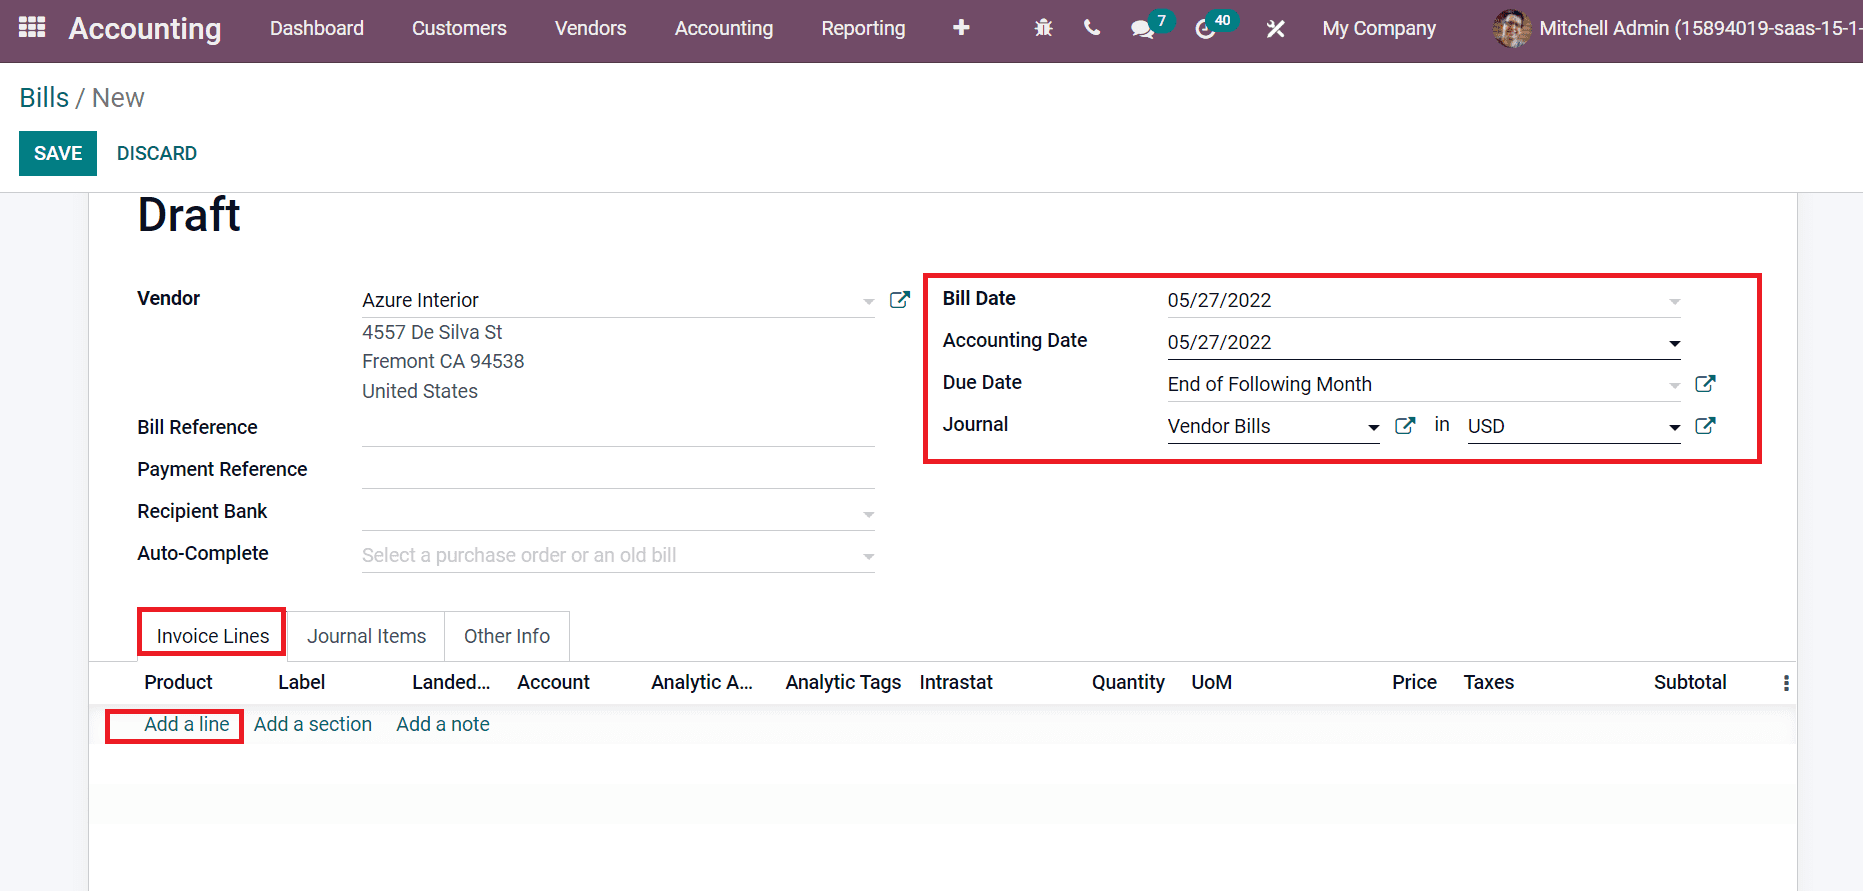 how-to-create-analytic-tags-with-the-odoo-15-accounting-module-cybrosys